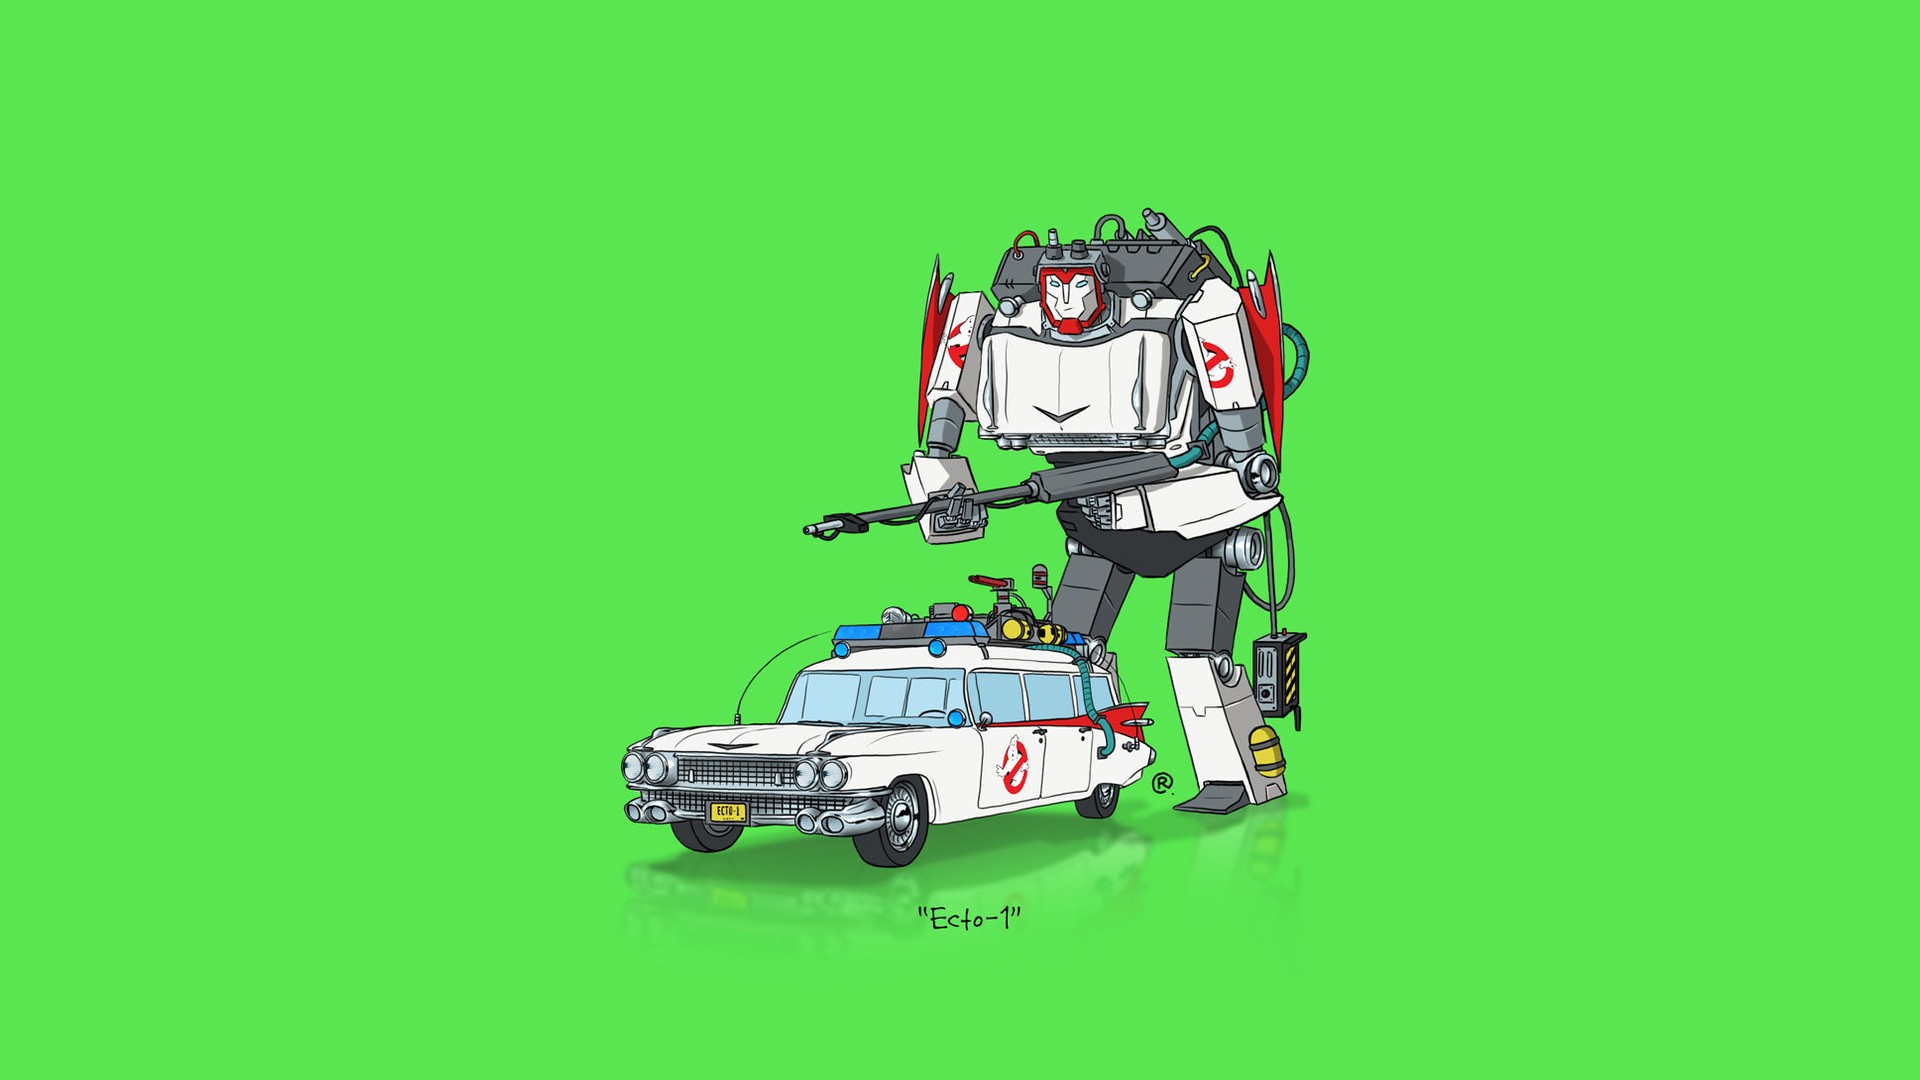 General 1920x1080 car Transformers minimalism Ghostbusters crossover white cars green background movies vehicle robot Ecto-1 (Ghostbusters)